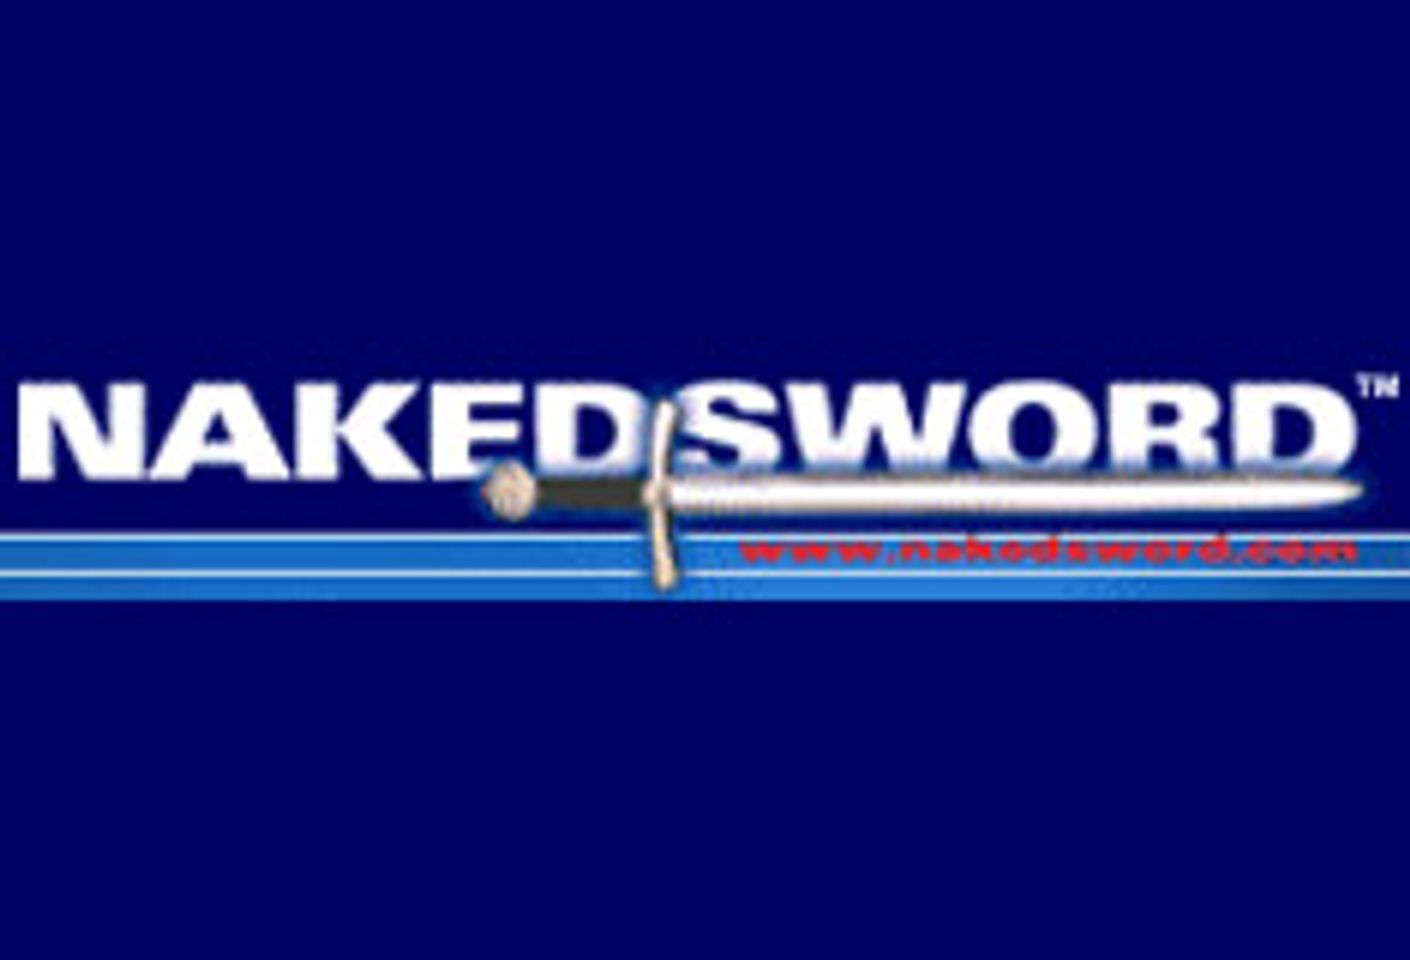 NakedSword.com Launches Personal VOD Theaters